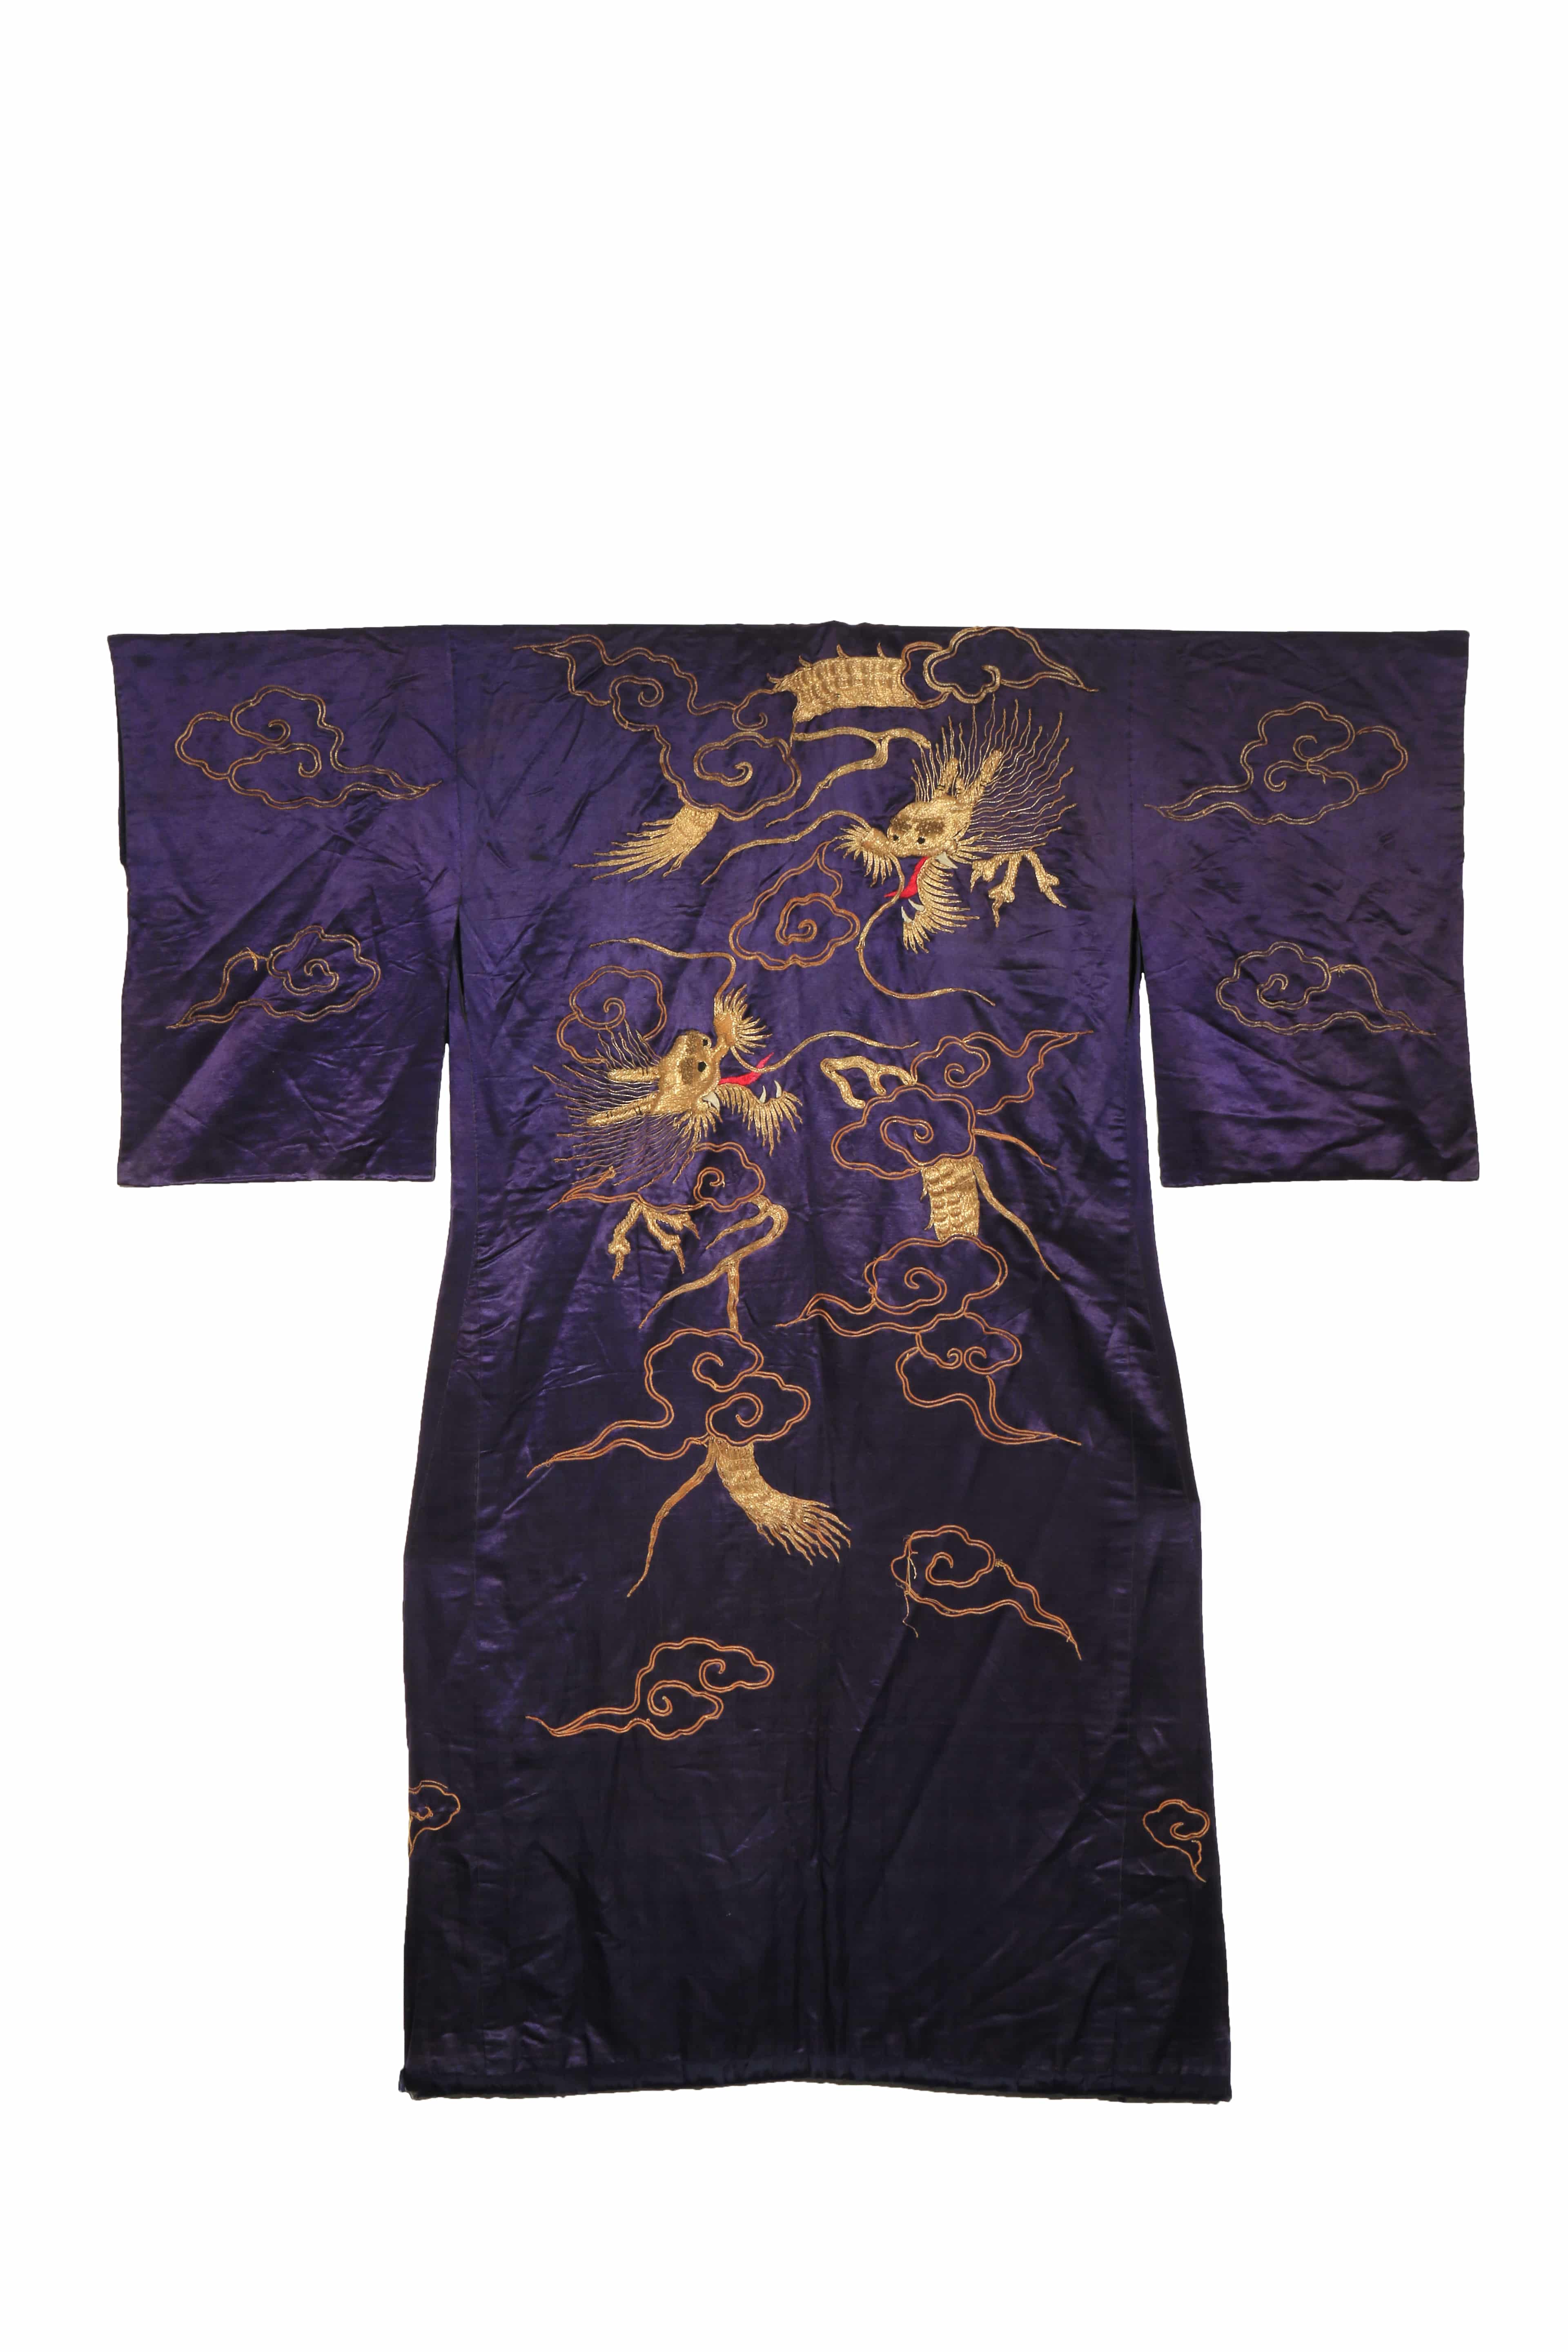 Original Turandot’s costumes are up for sale